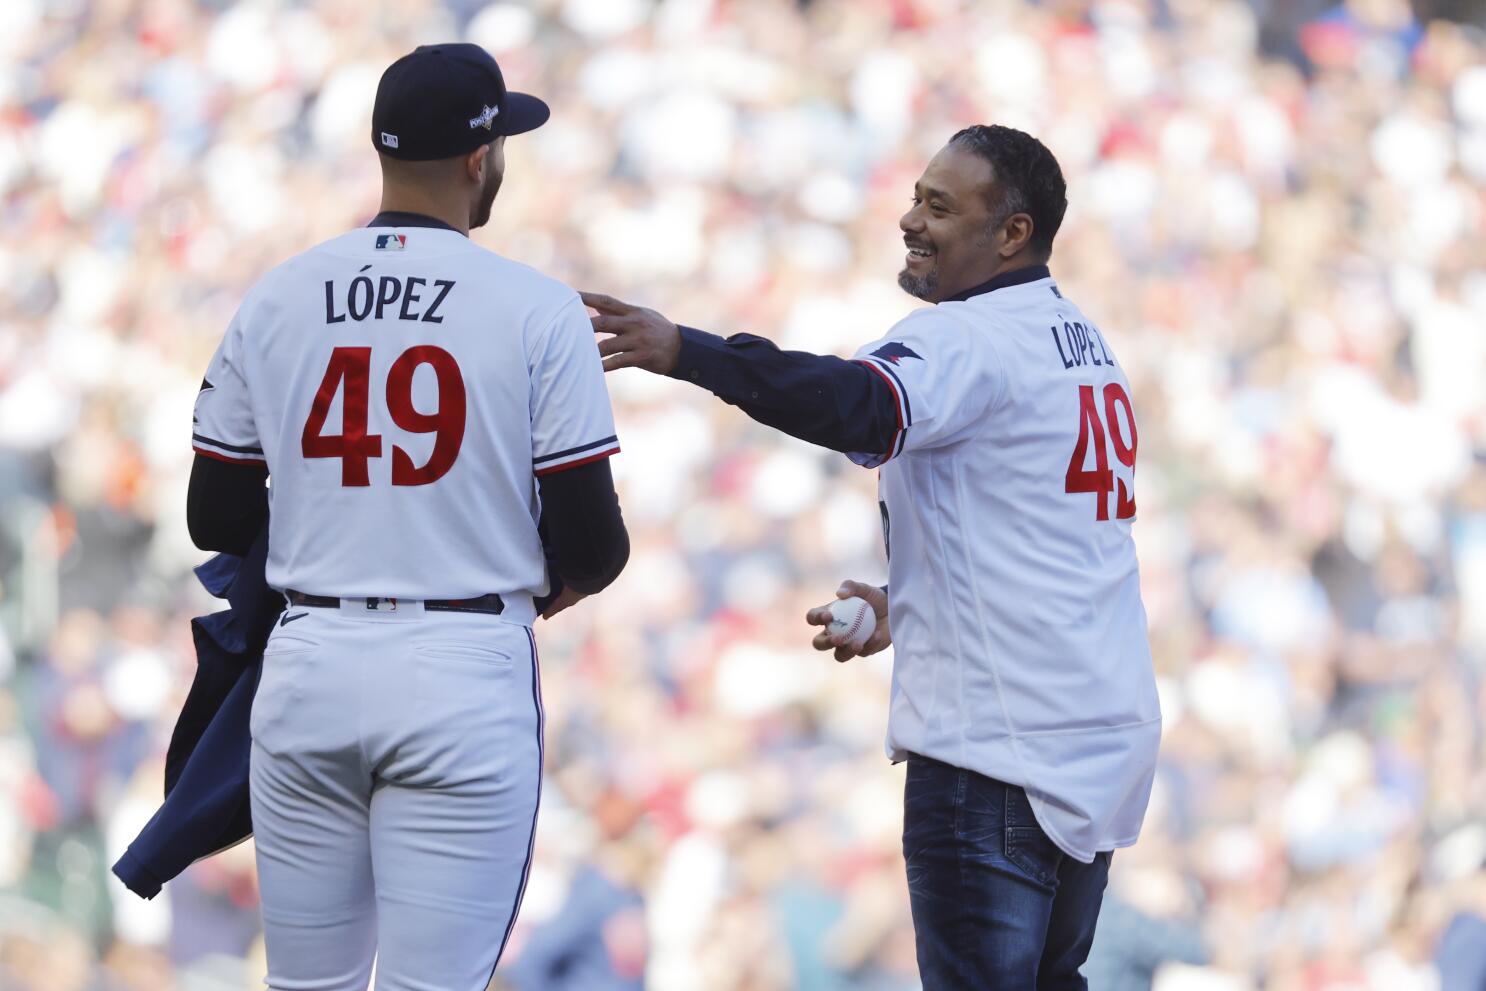 Santana dons López jersey as former and current Twins pitchers